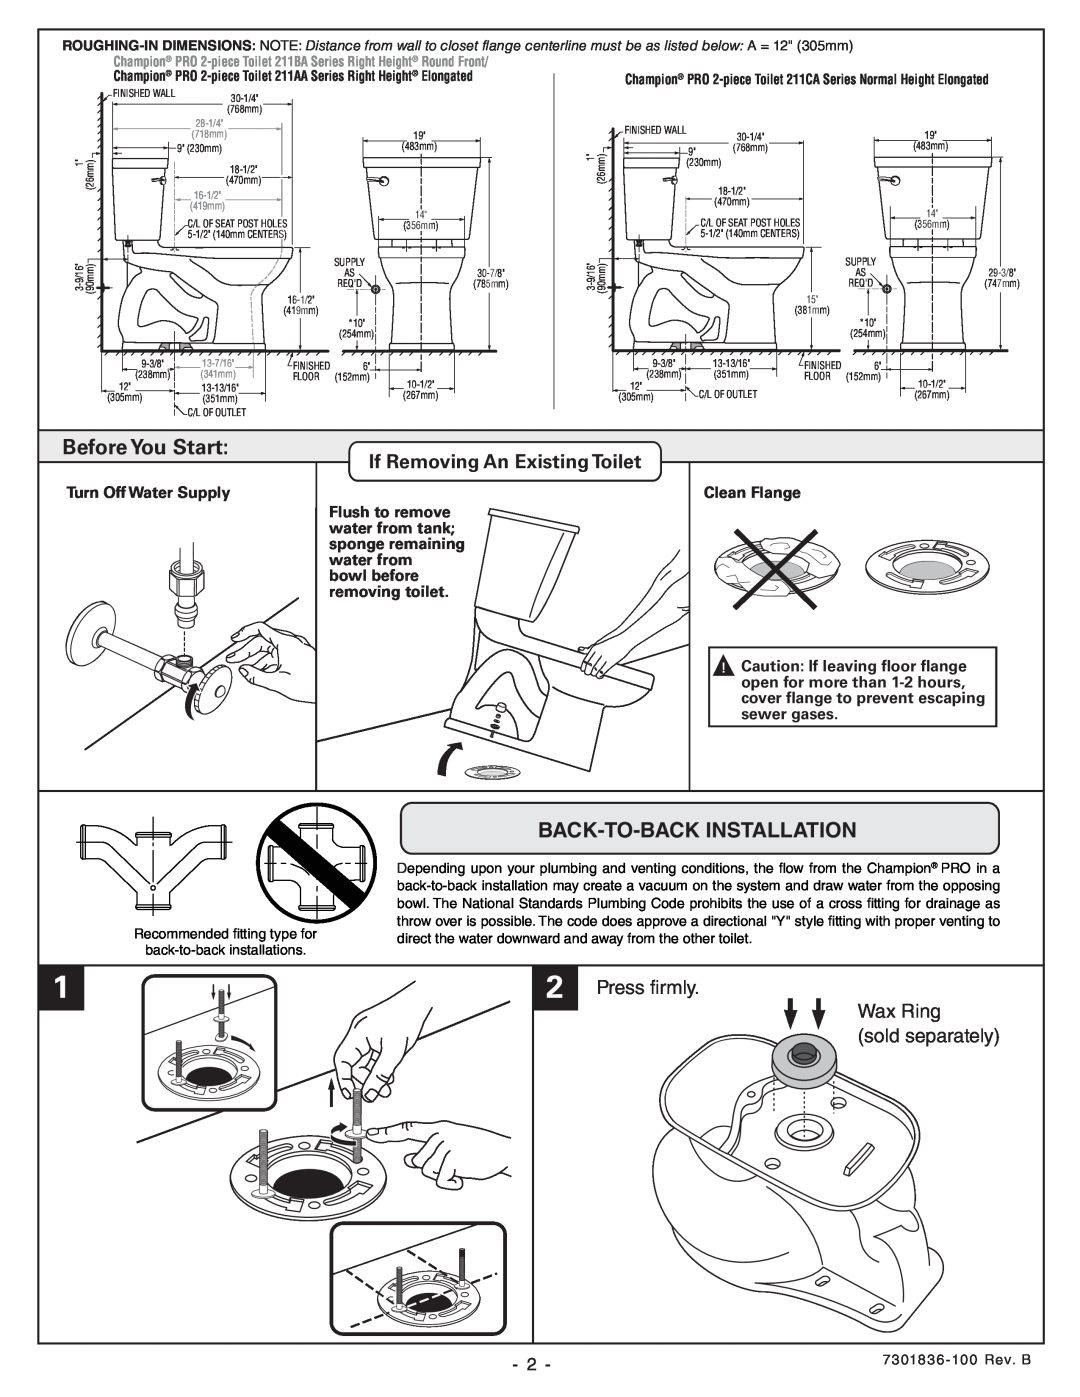 American Standard 211CA, 211BB Before You Start, Back-To-Back Installation, If Removing An Existing Toilet, Press firmly 